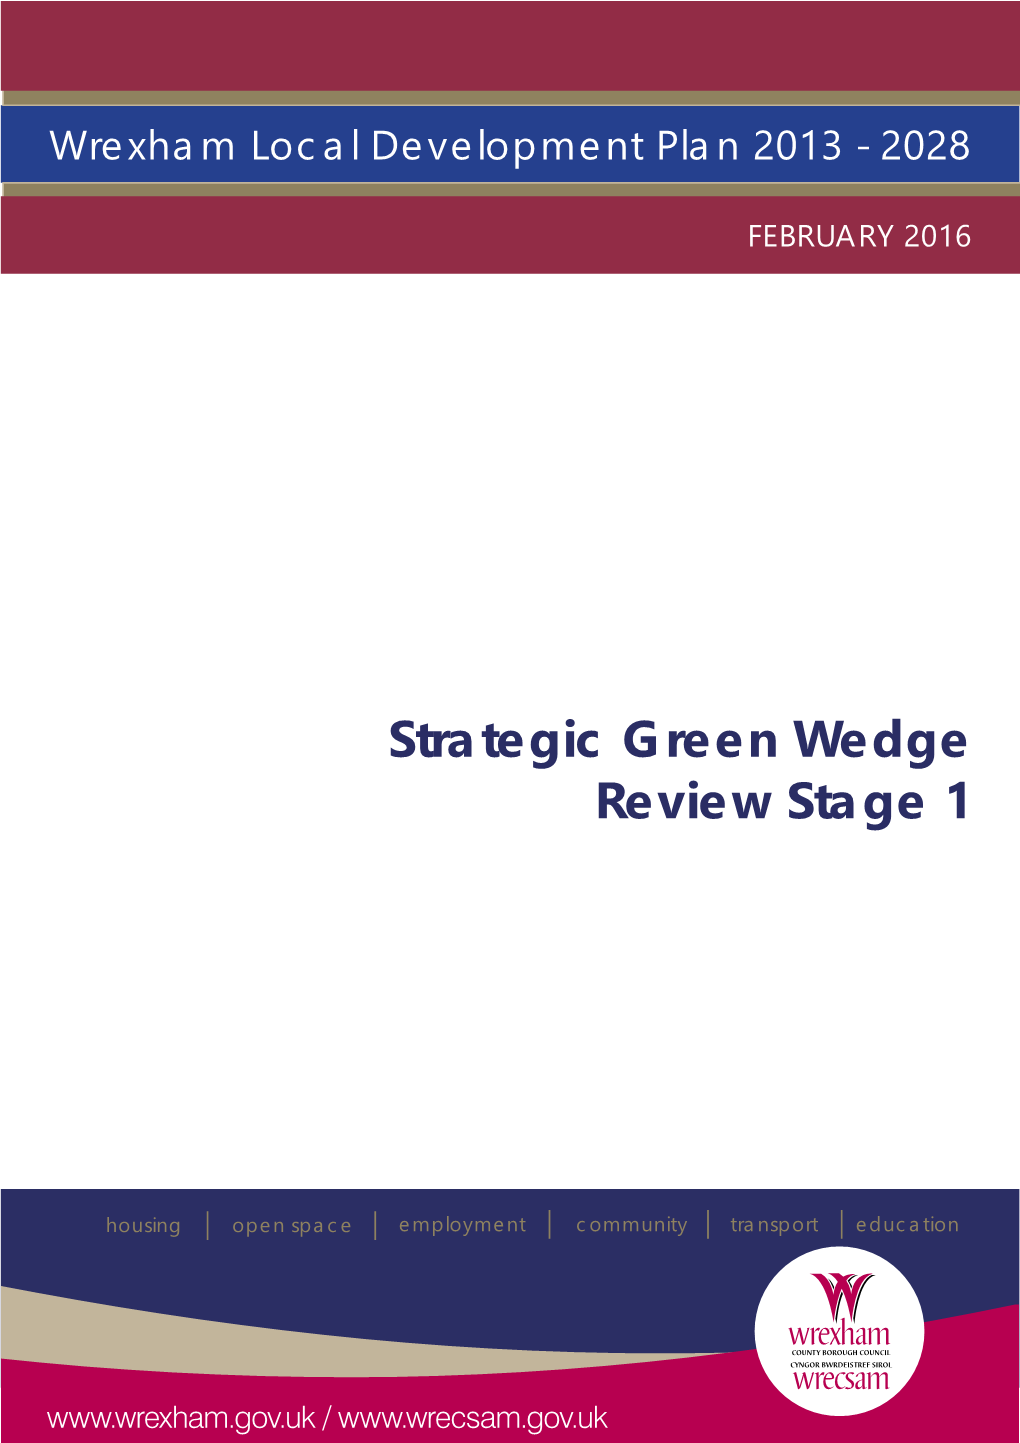 Strategic Green Wedge Review Stage 1